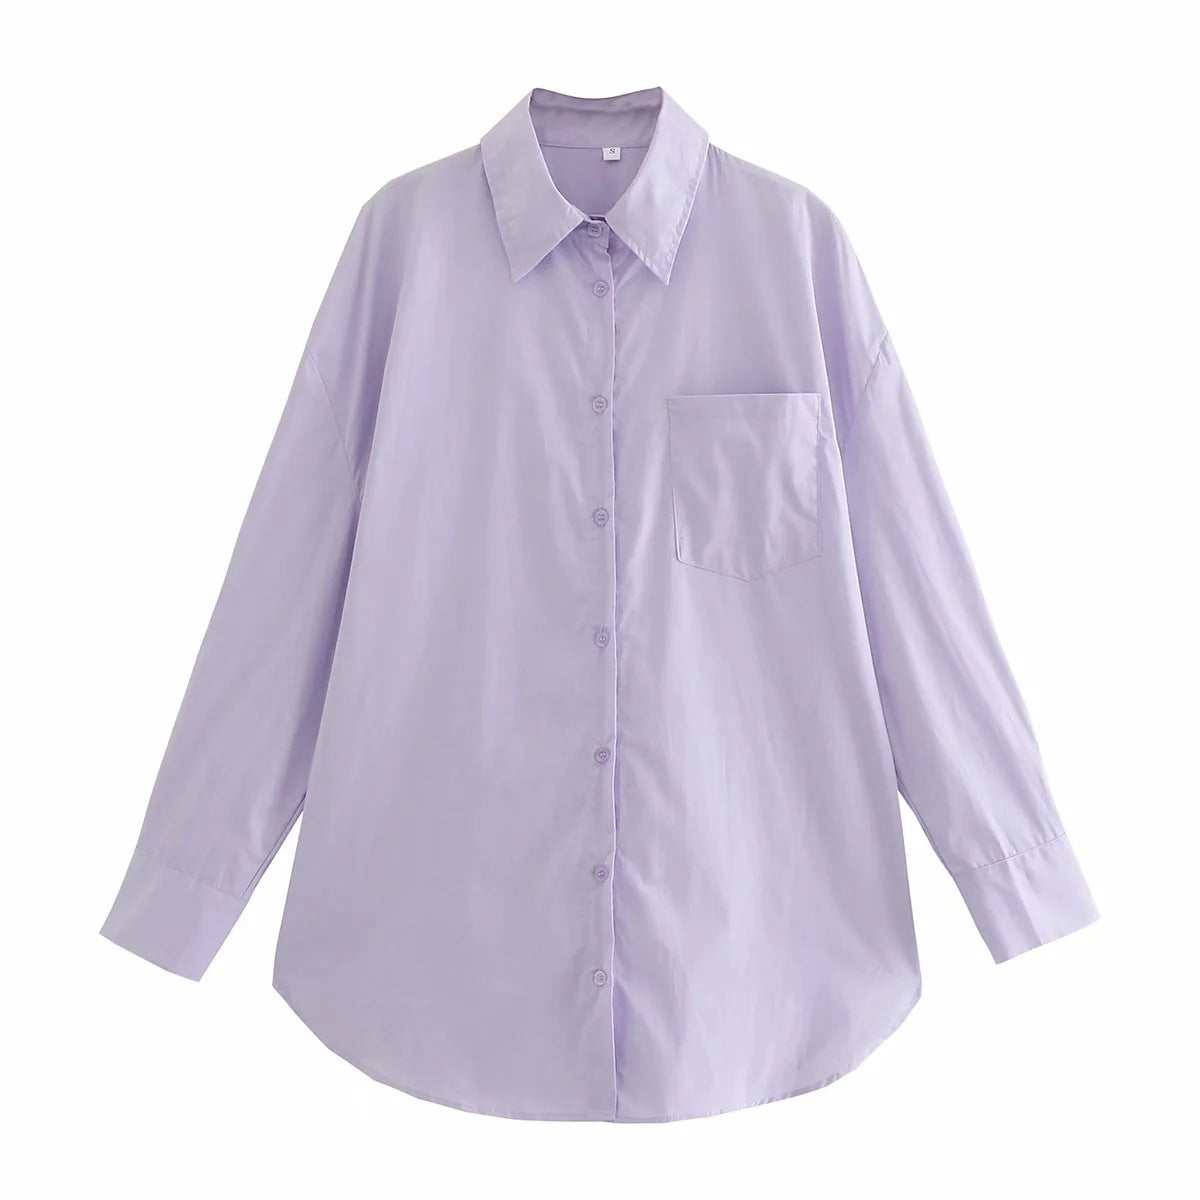 Women's Basic Long-sleeved Shirt With Autumn Pockets Blouses